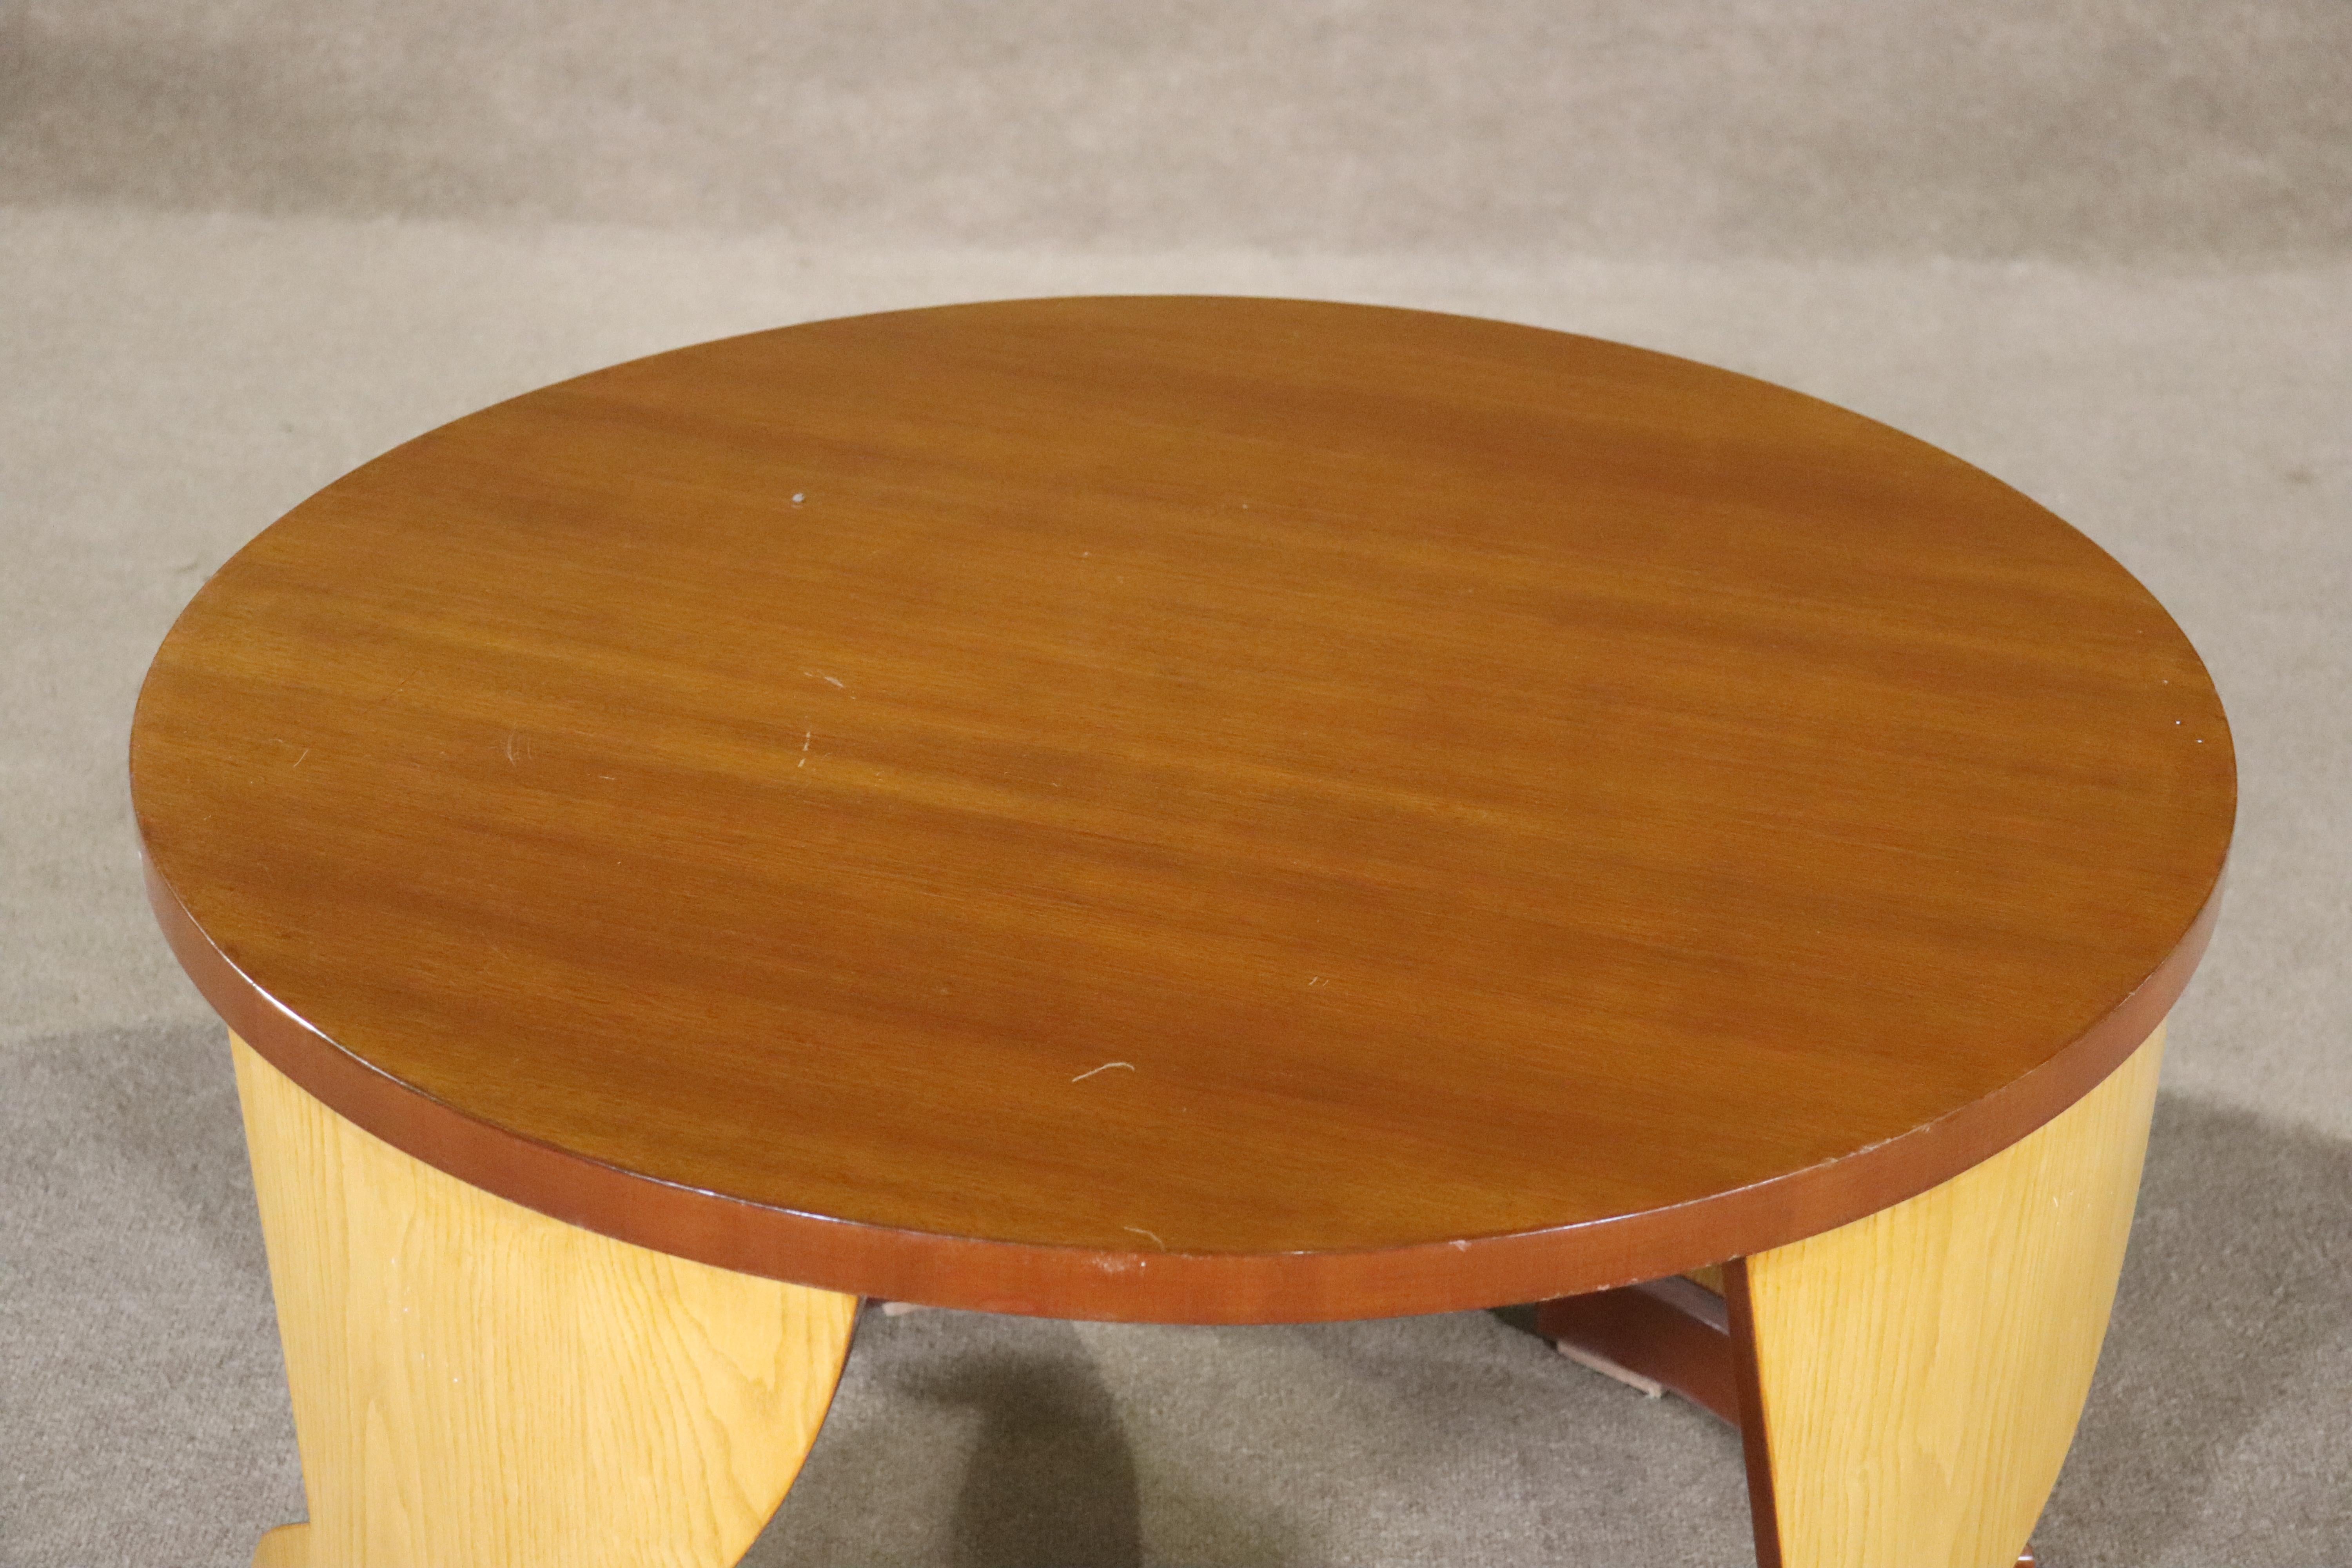 Vintage coffee table in two tones wood grain, with fun deco style design. 
Please confirm location NY or NJ